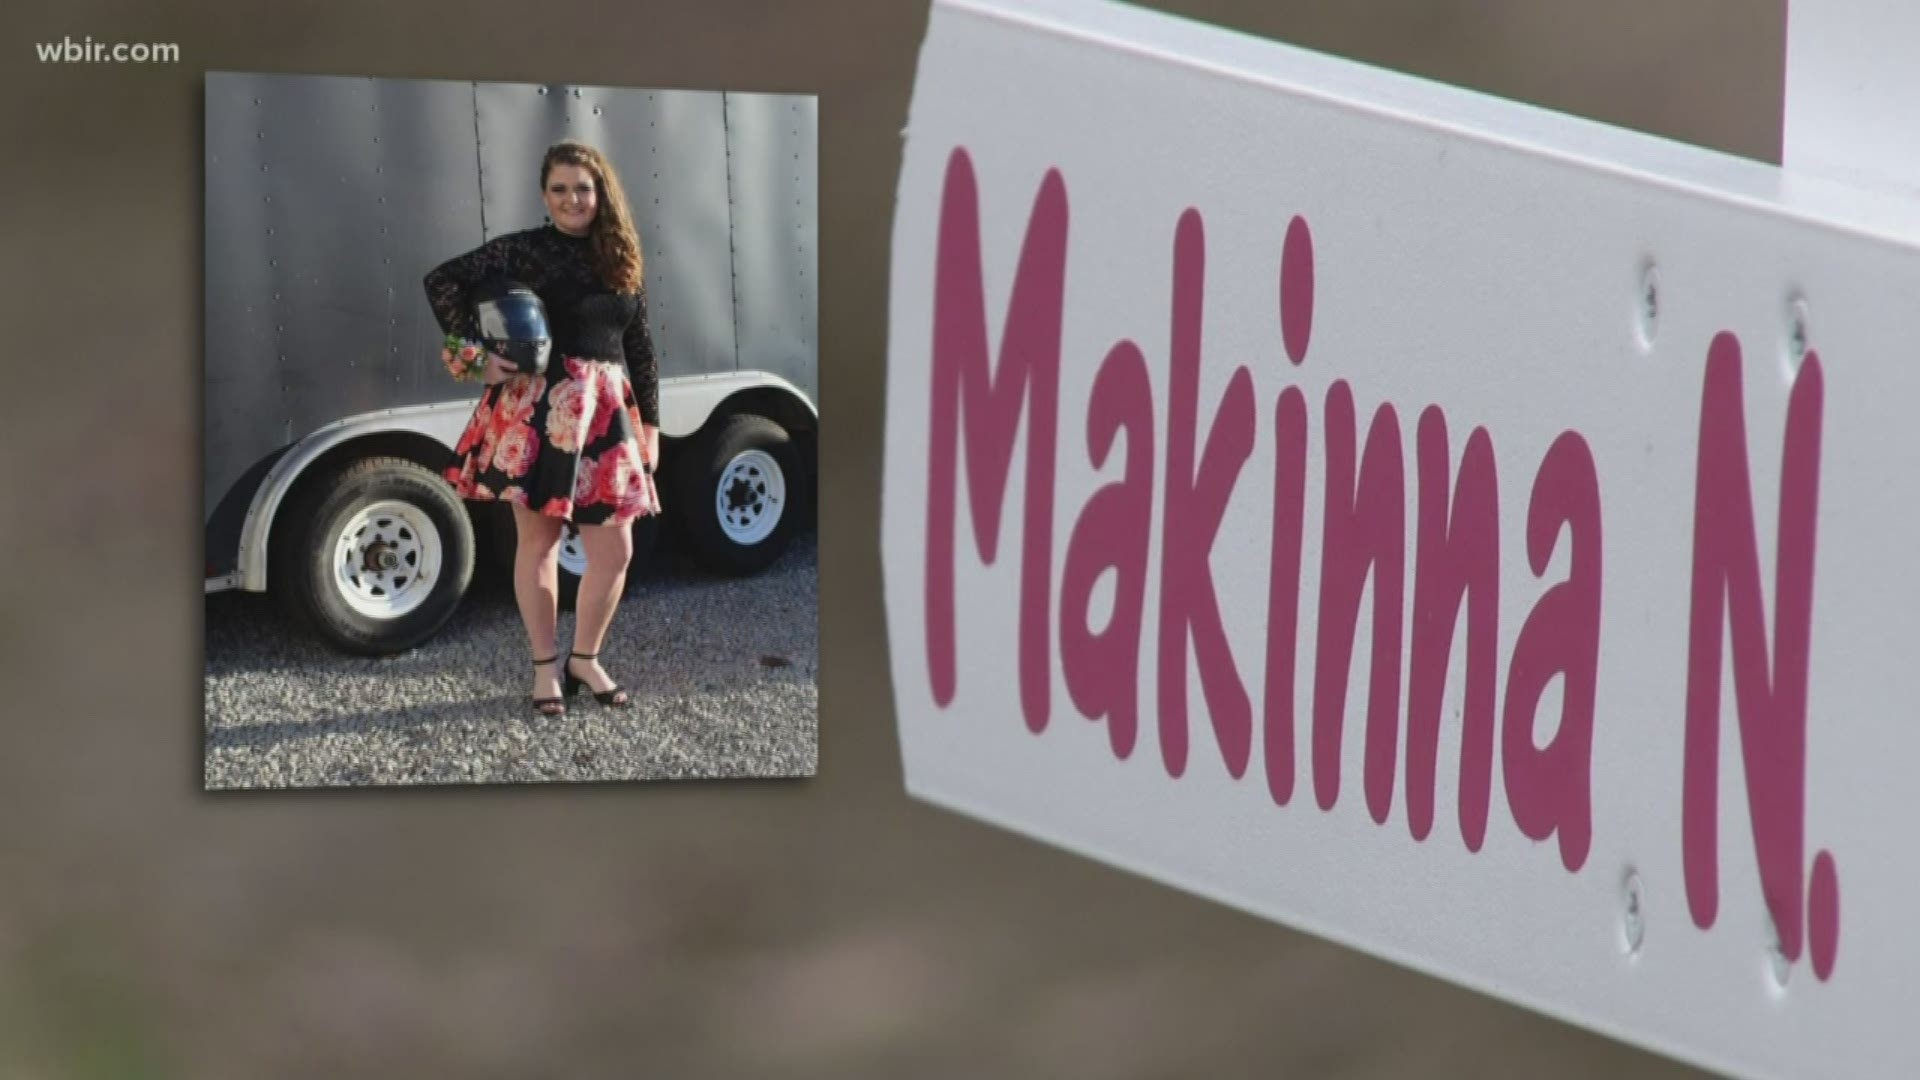 It's been almost four months since Branda Melinn said goodbye to her 16-year-old daughter Makinna Smith. She's carrying Makinna's giving spirit into the holidays.